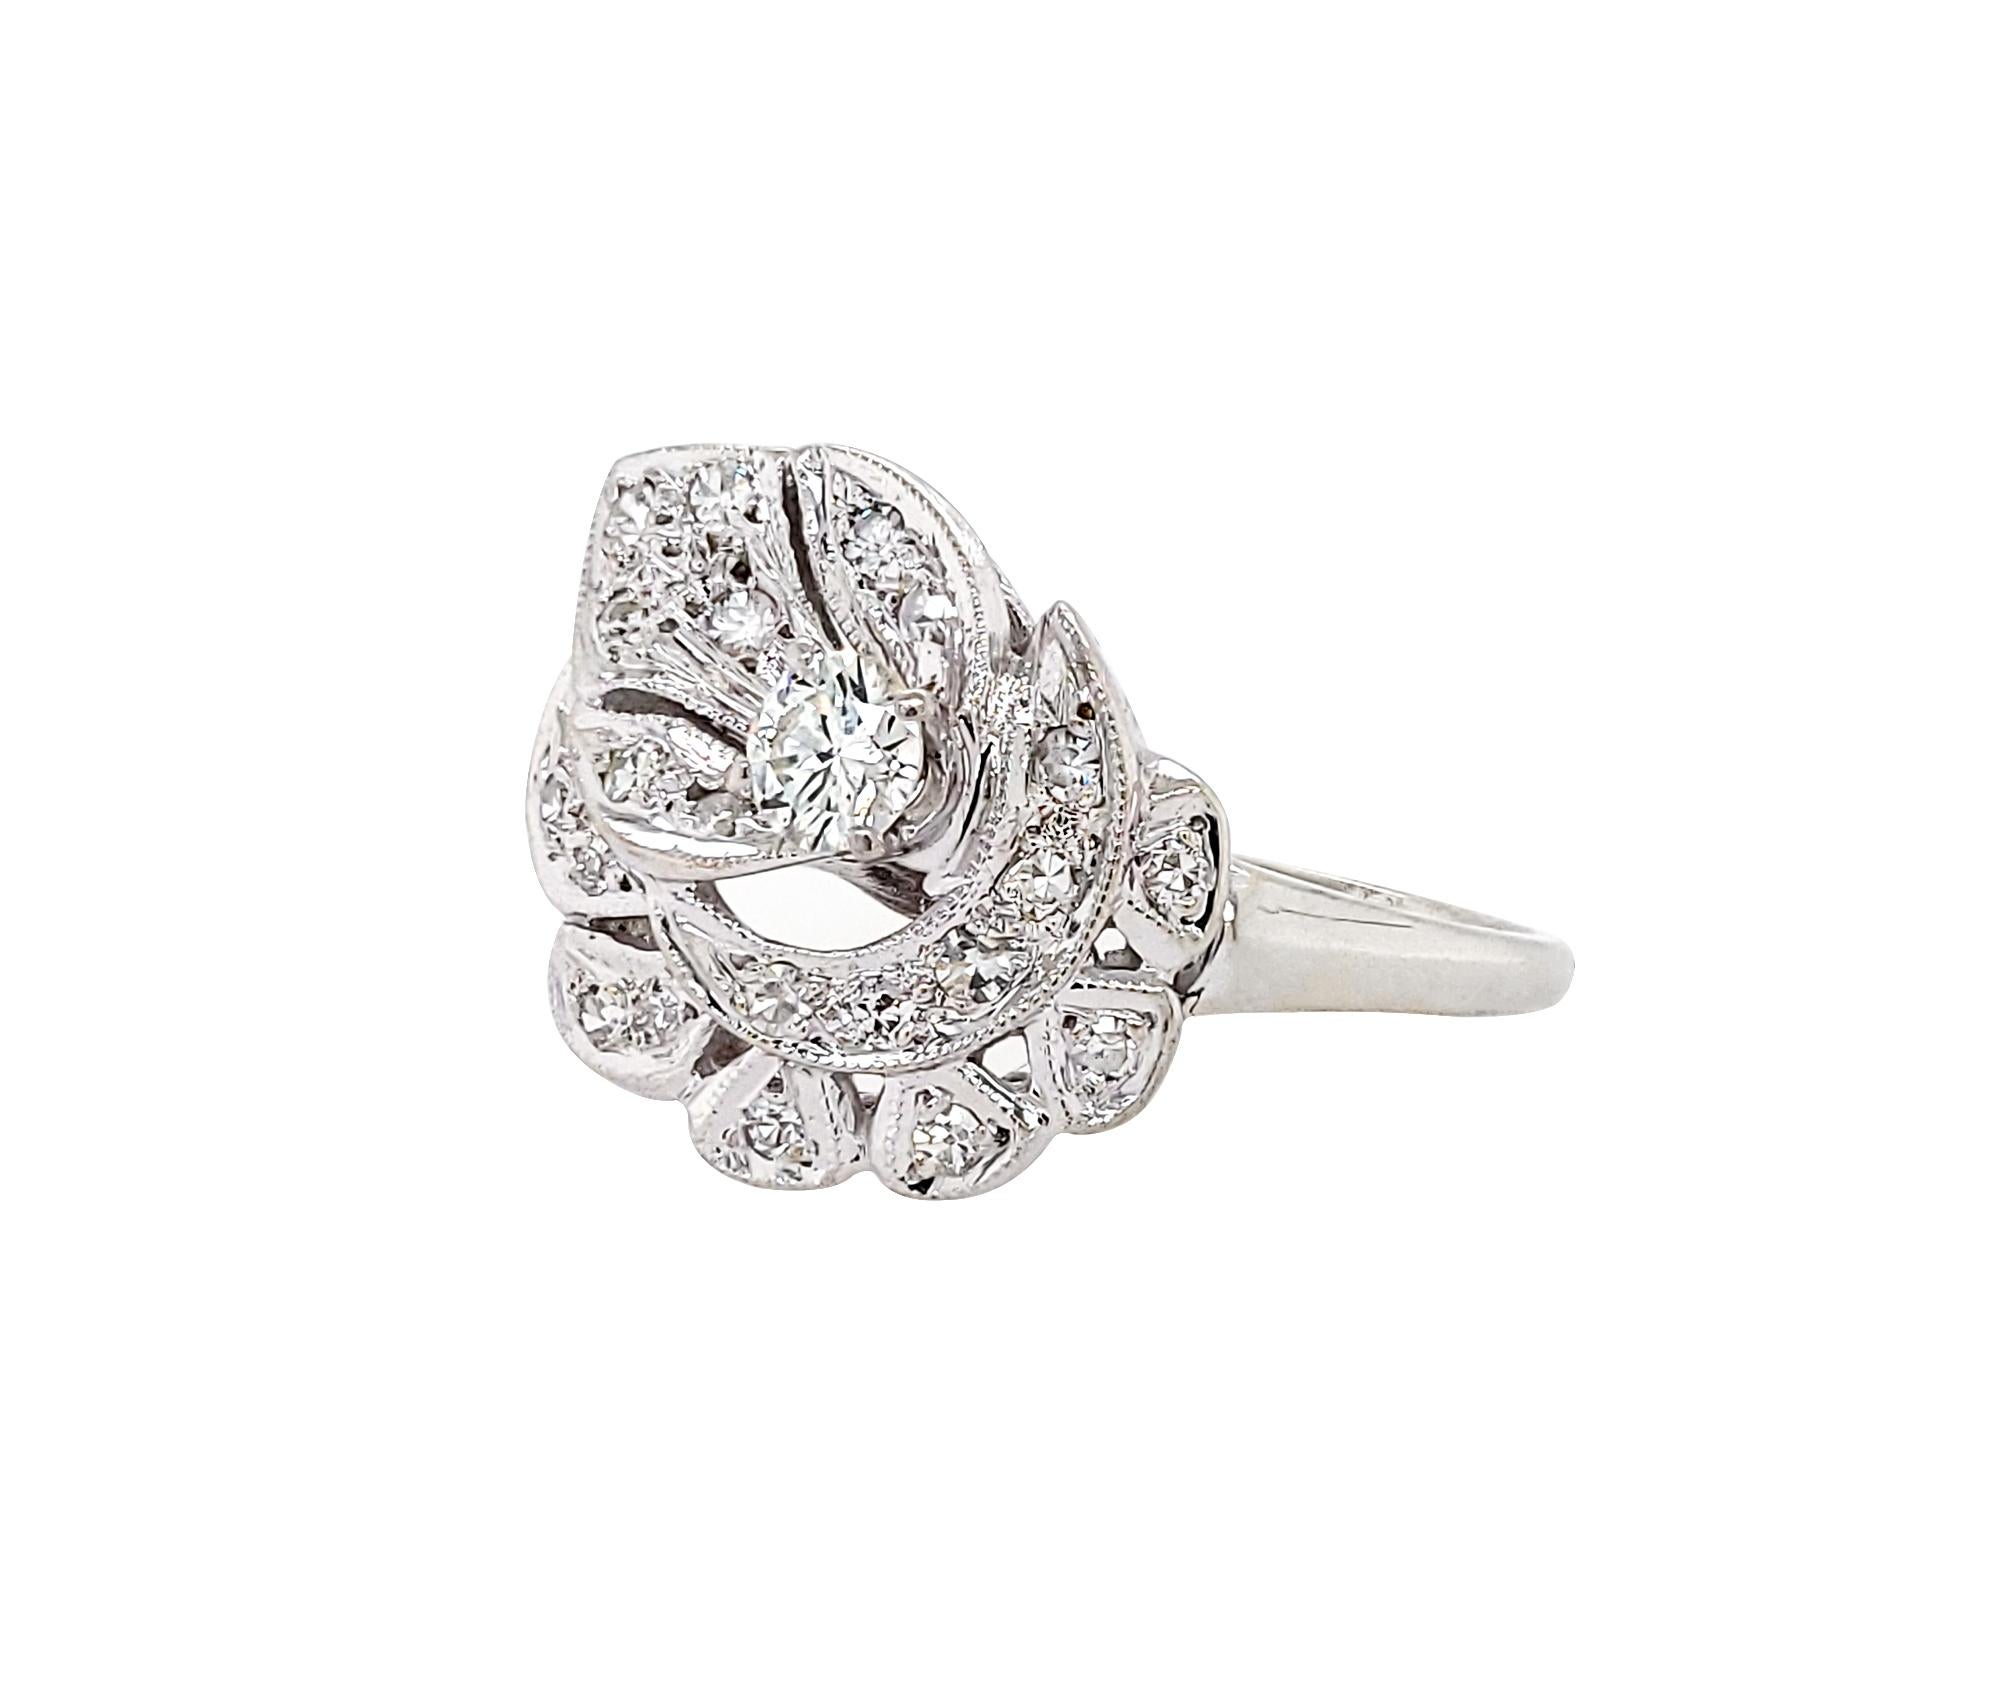 A beautiful vintage cocktail ring made in the late 20th century.
The ring is decorated with a 0.90 carat center diamond and approximately 1 carat of round diamonds.
The metal is platinum weighing 7.10 grams.
Size 12. Resizing available.